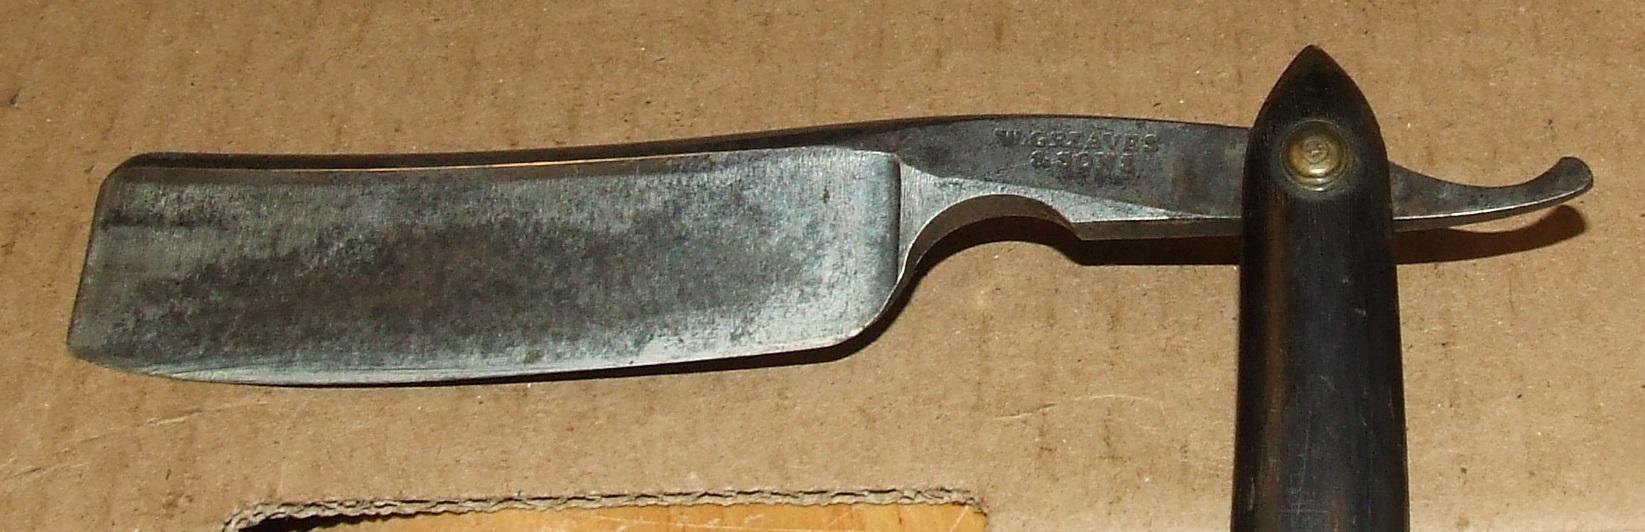 Early W Greaves & Sons Razor